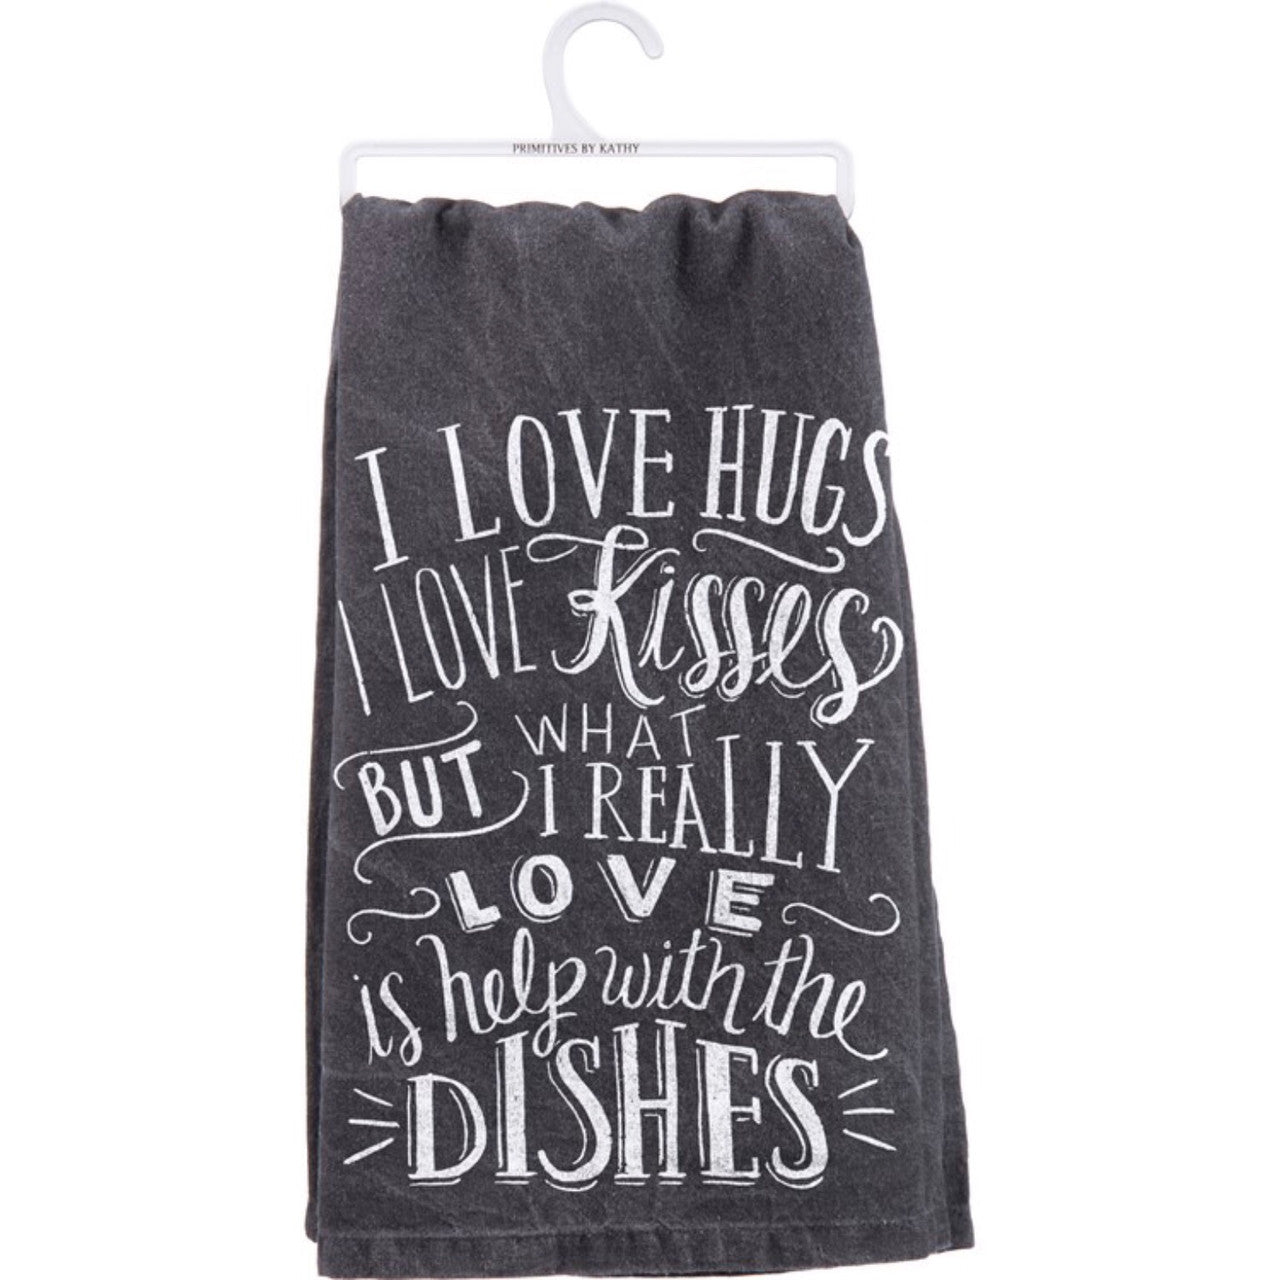 Really Love Help Dishes Towel